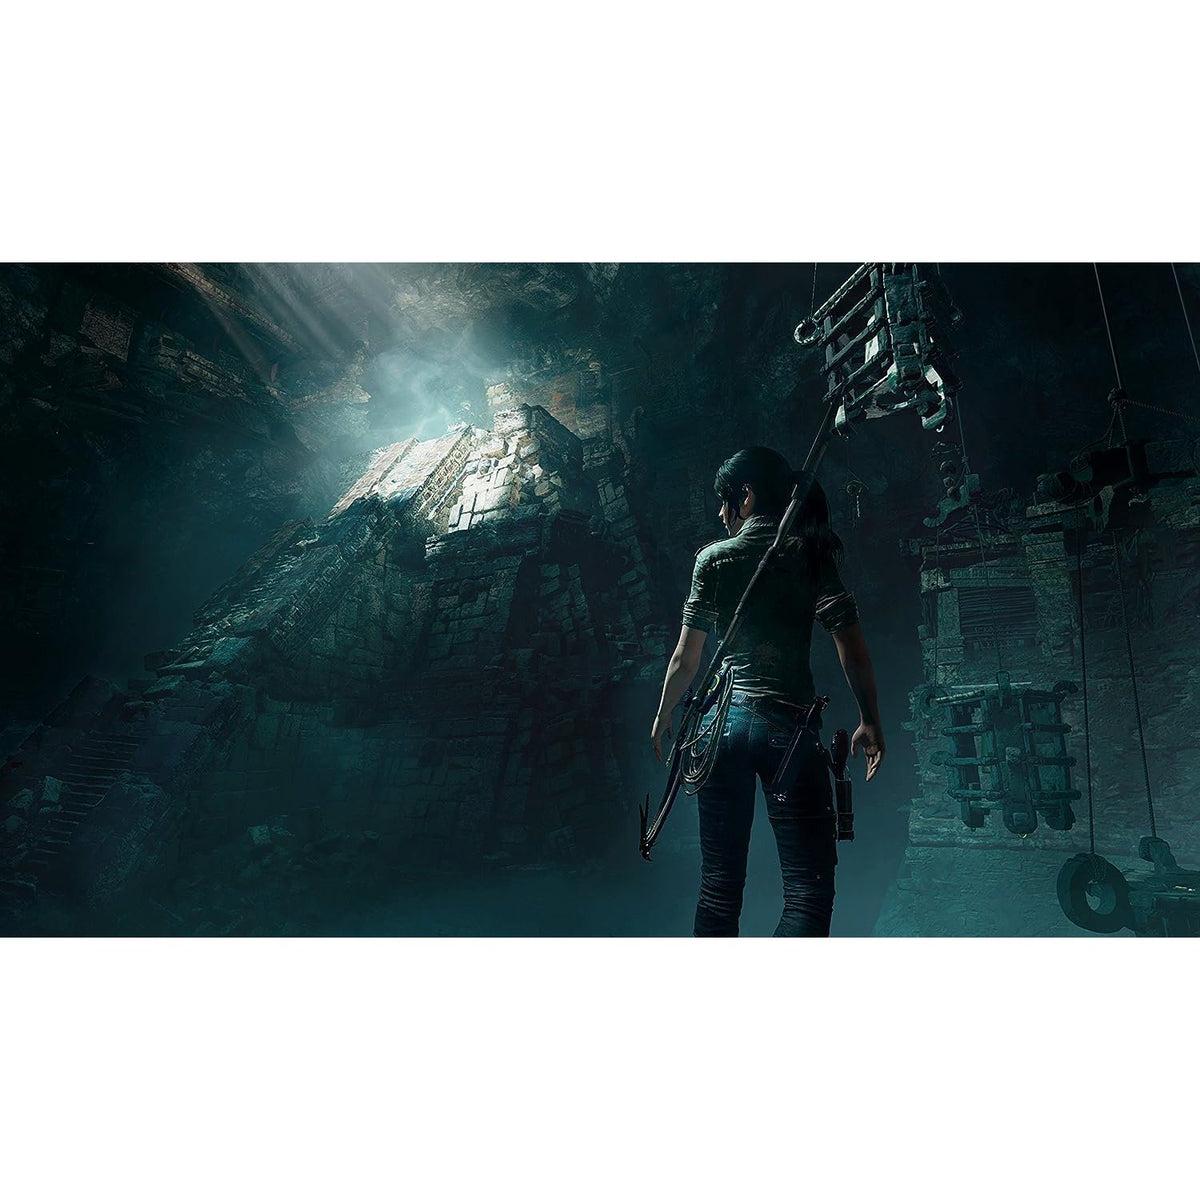 Shadow Of The Tomb Raider Sony PlayStation 4